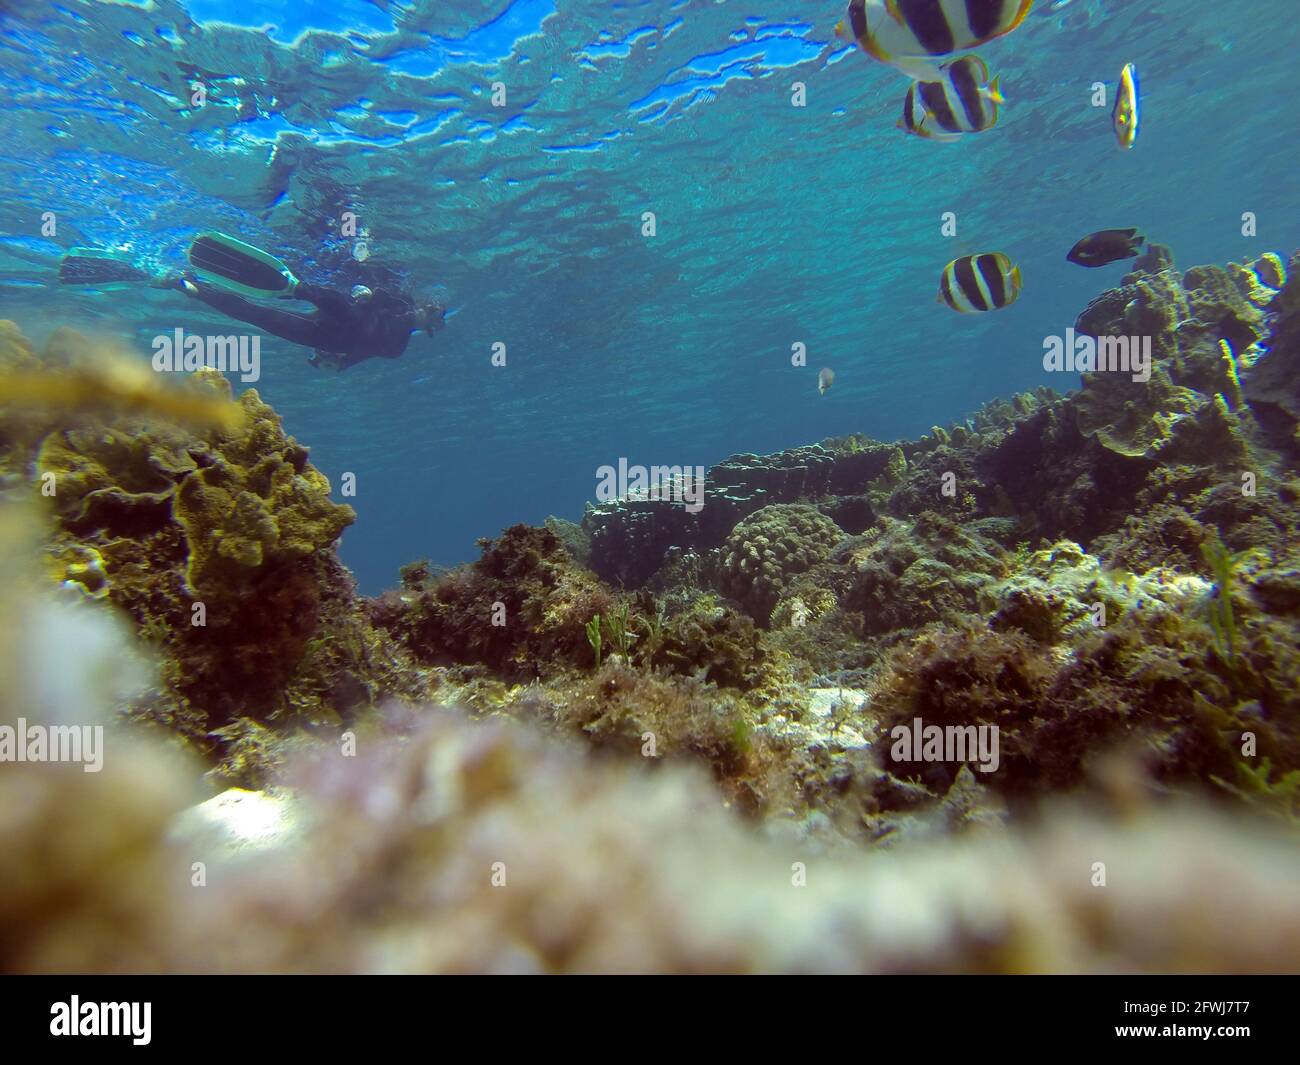 Butterflyfish watching snorkeller, North Bay sanctuary zone, Lord Howe Island, NSW, Australia. No MR or PR Stock Photo